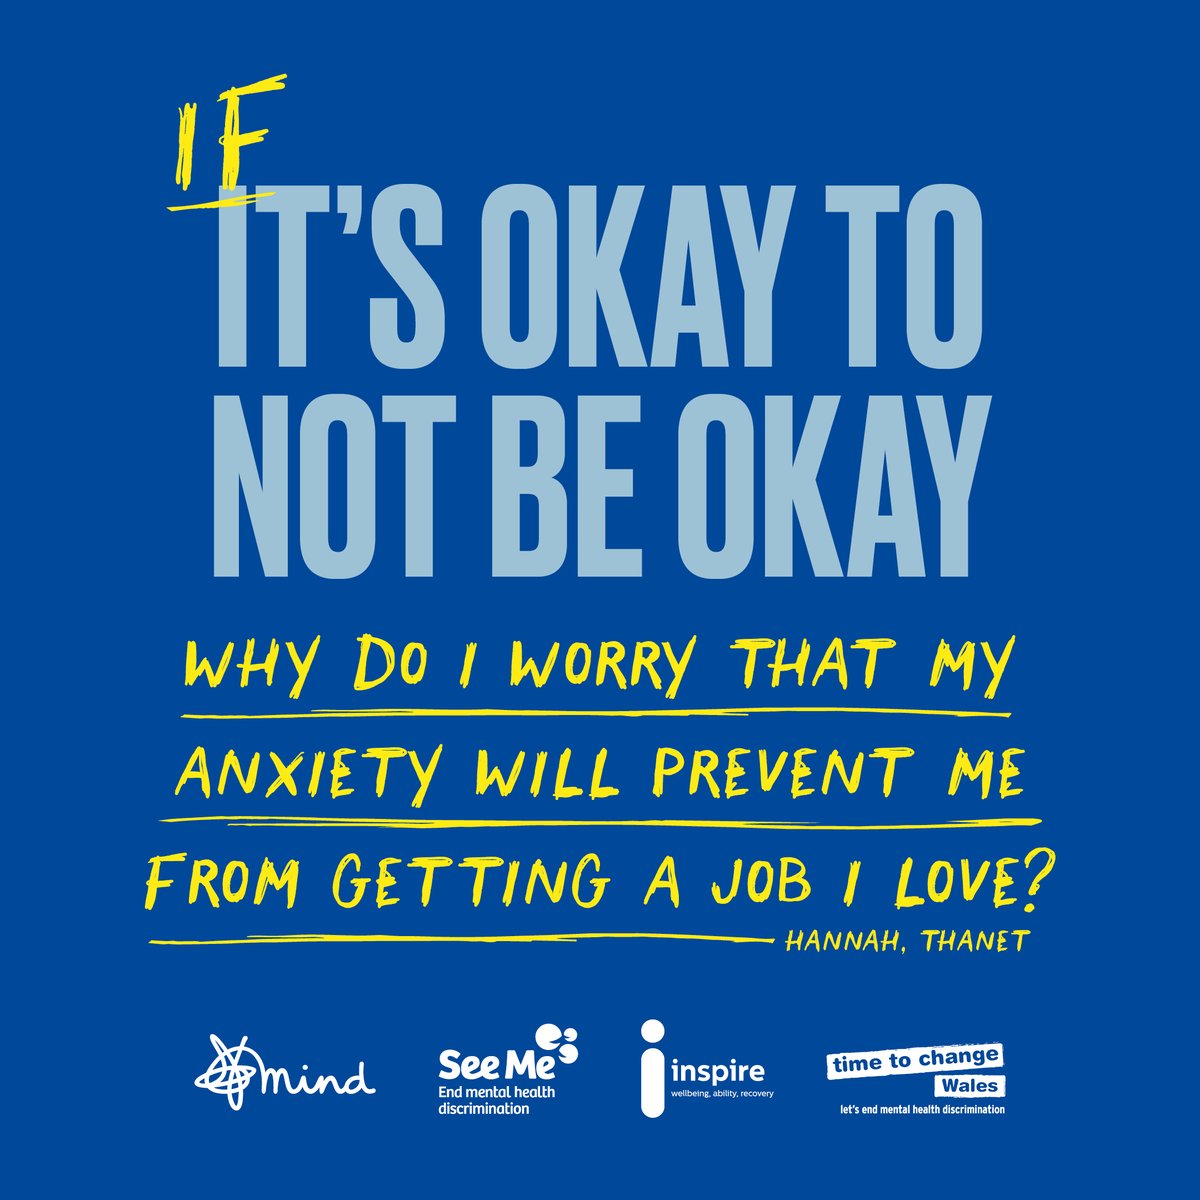 Research shows 51% of people in the UK still believe there's a great deal/fair amount of shame associated with mental health conditions. Feeling shame stops people getting the support they need. #IfItsOkay to not be okay, help us tackle the stigma 👇 bit.ly/if-its-okay-x